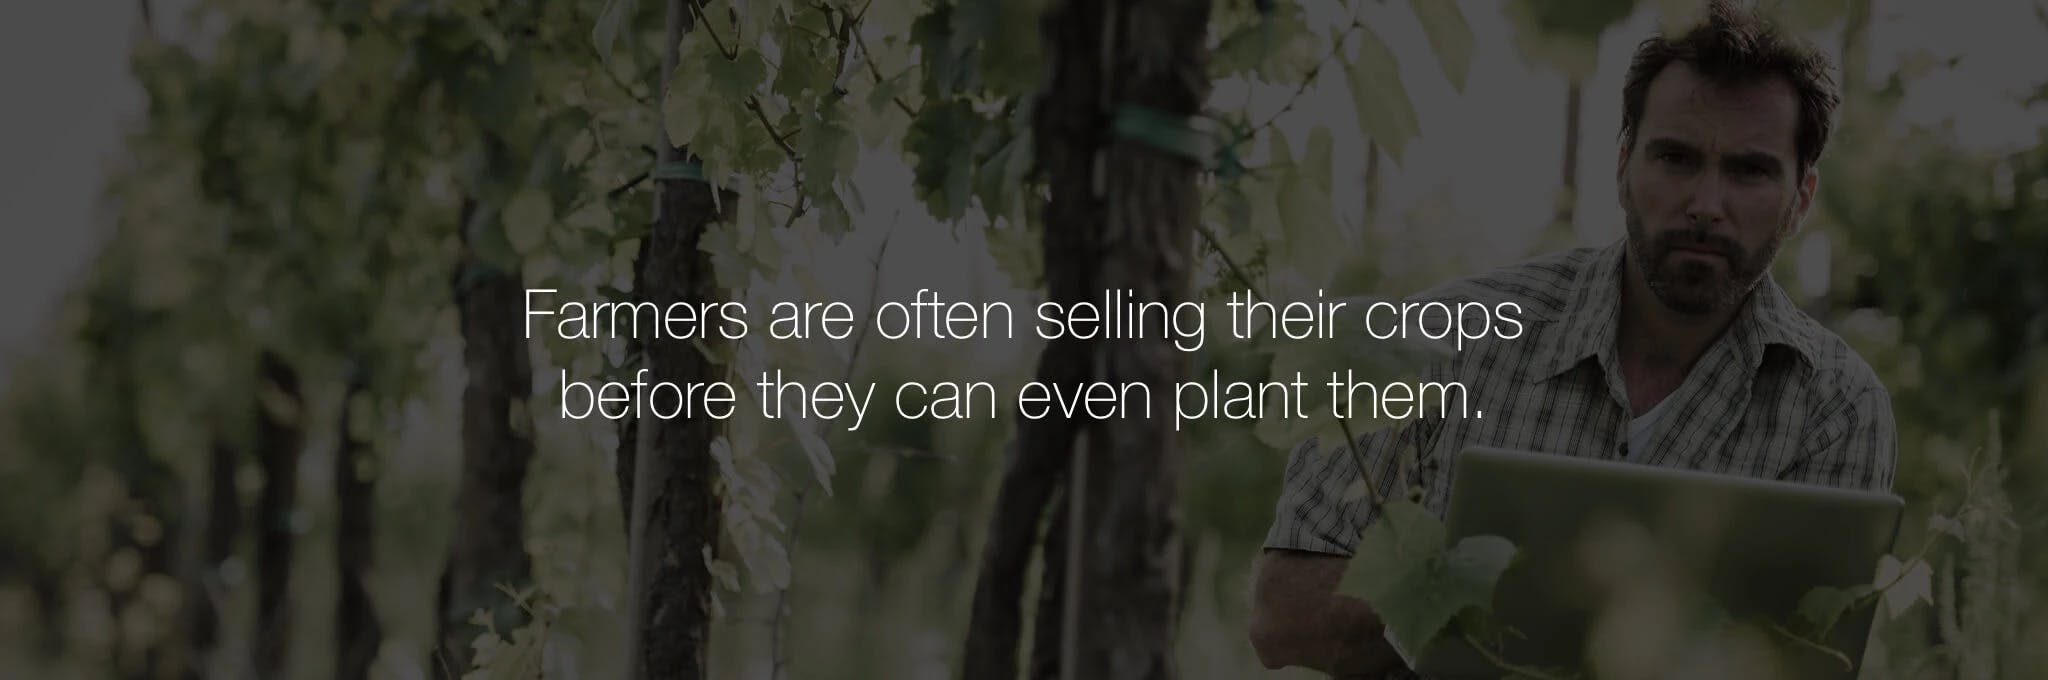 A message that reads "Farmers are often selling their crops before they can even plant them.""